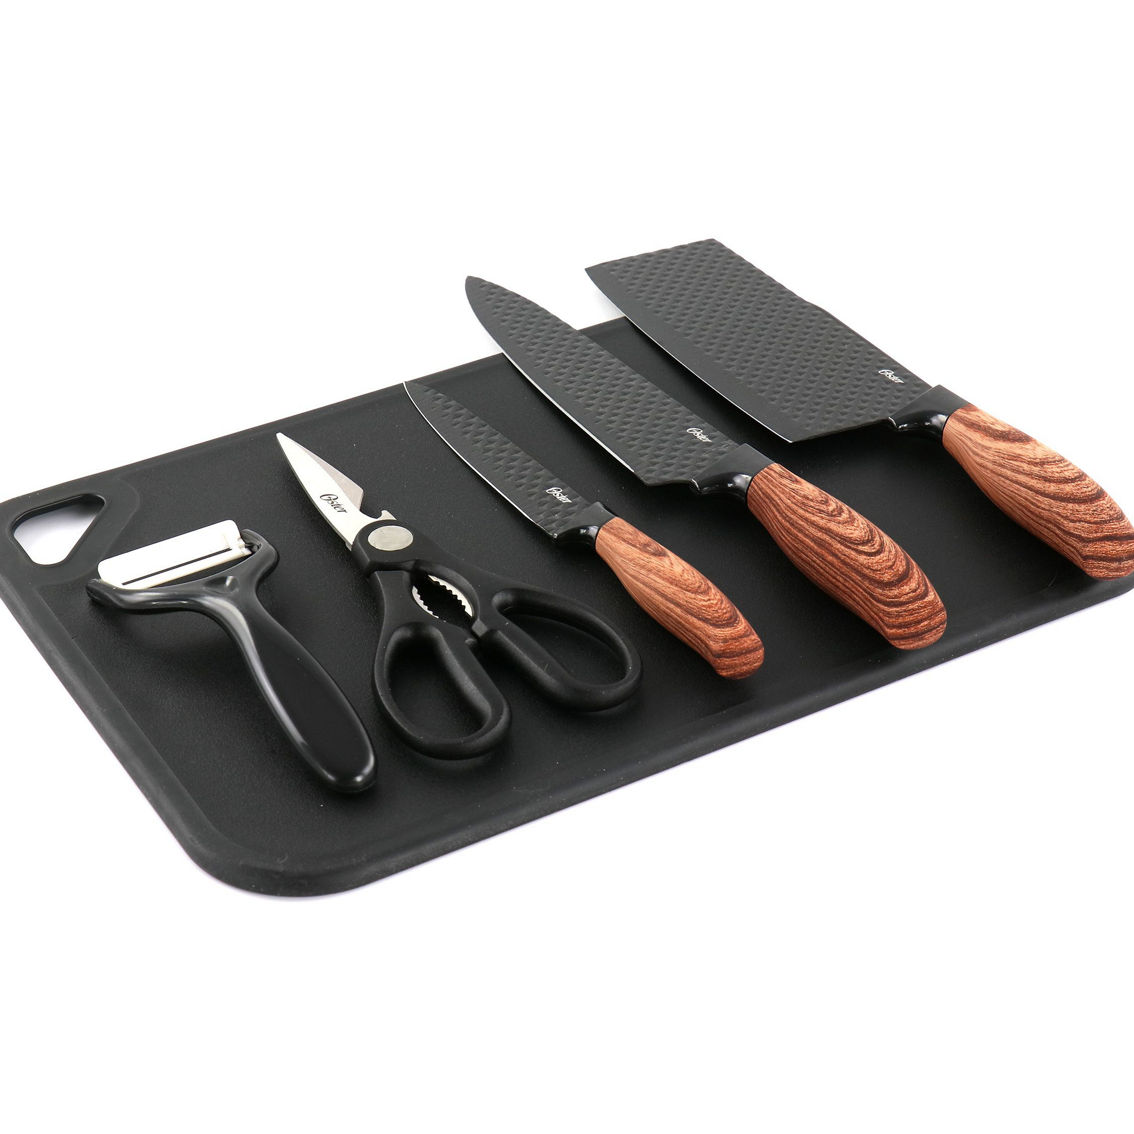 Oster Gunderson 6 Piece Black Stainless Steel Cutlery Set - Image 2 of 5